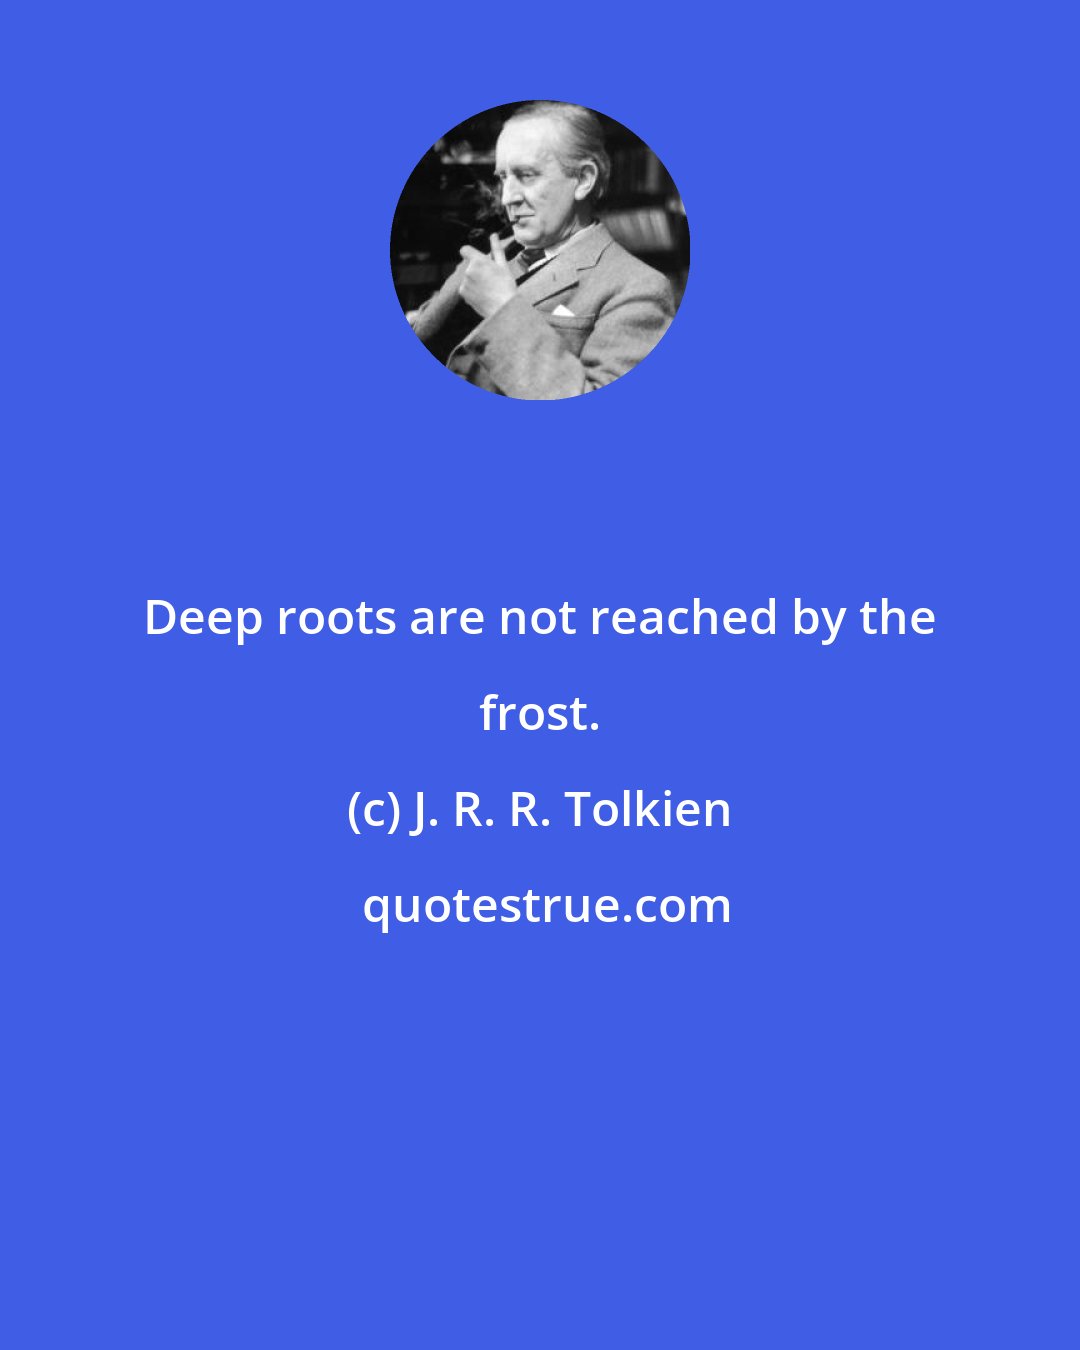 J. R. R. Tolkien: Deep roots are not reached by the frost.